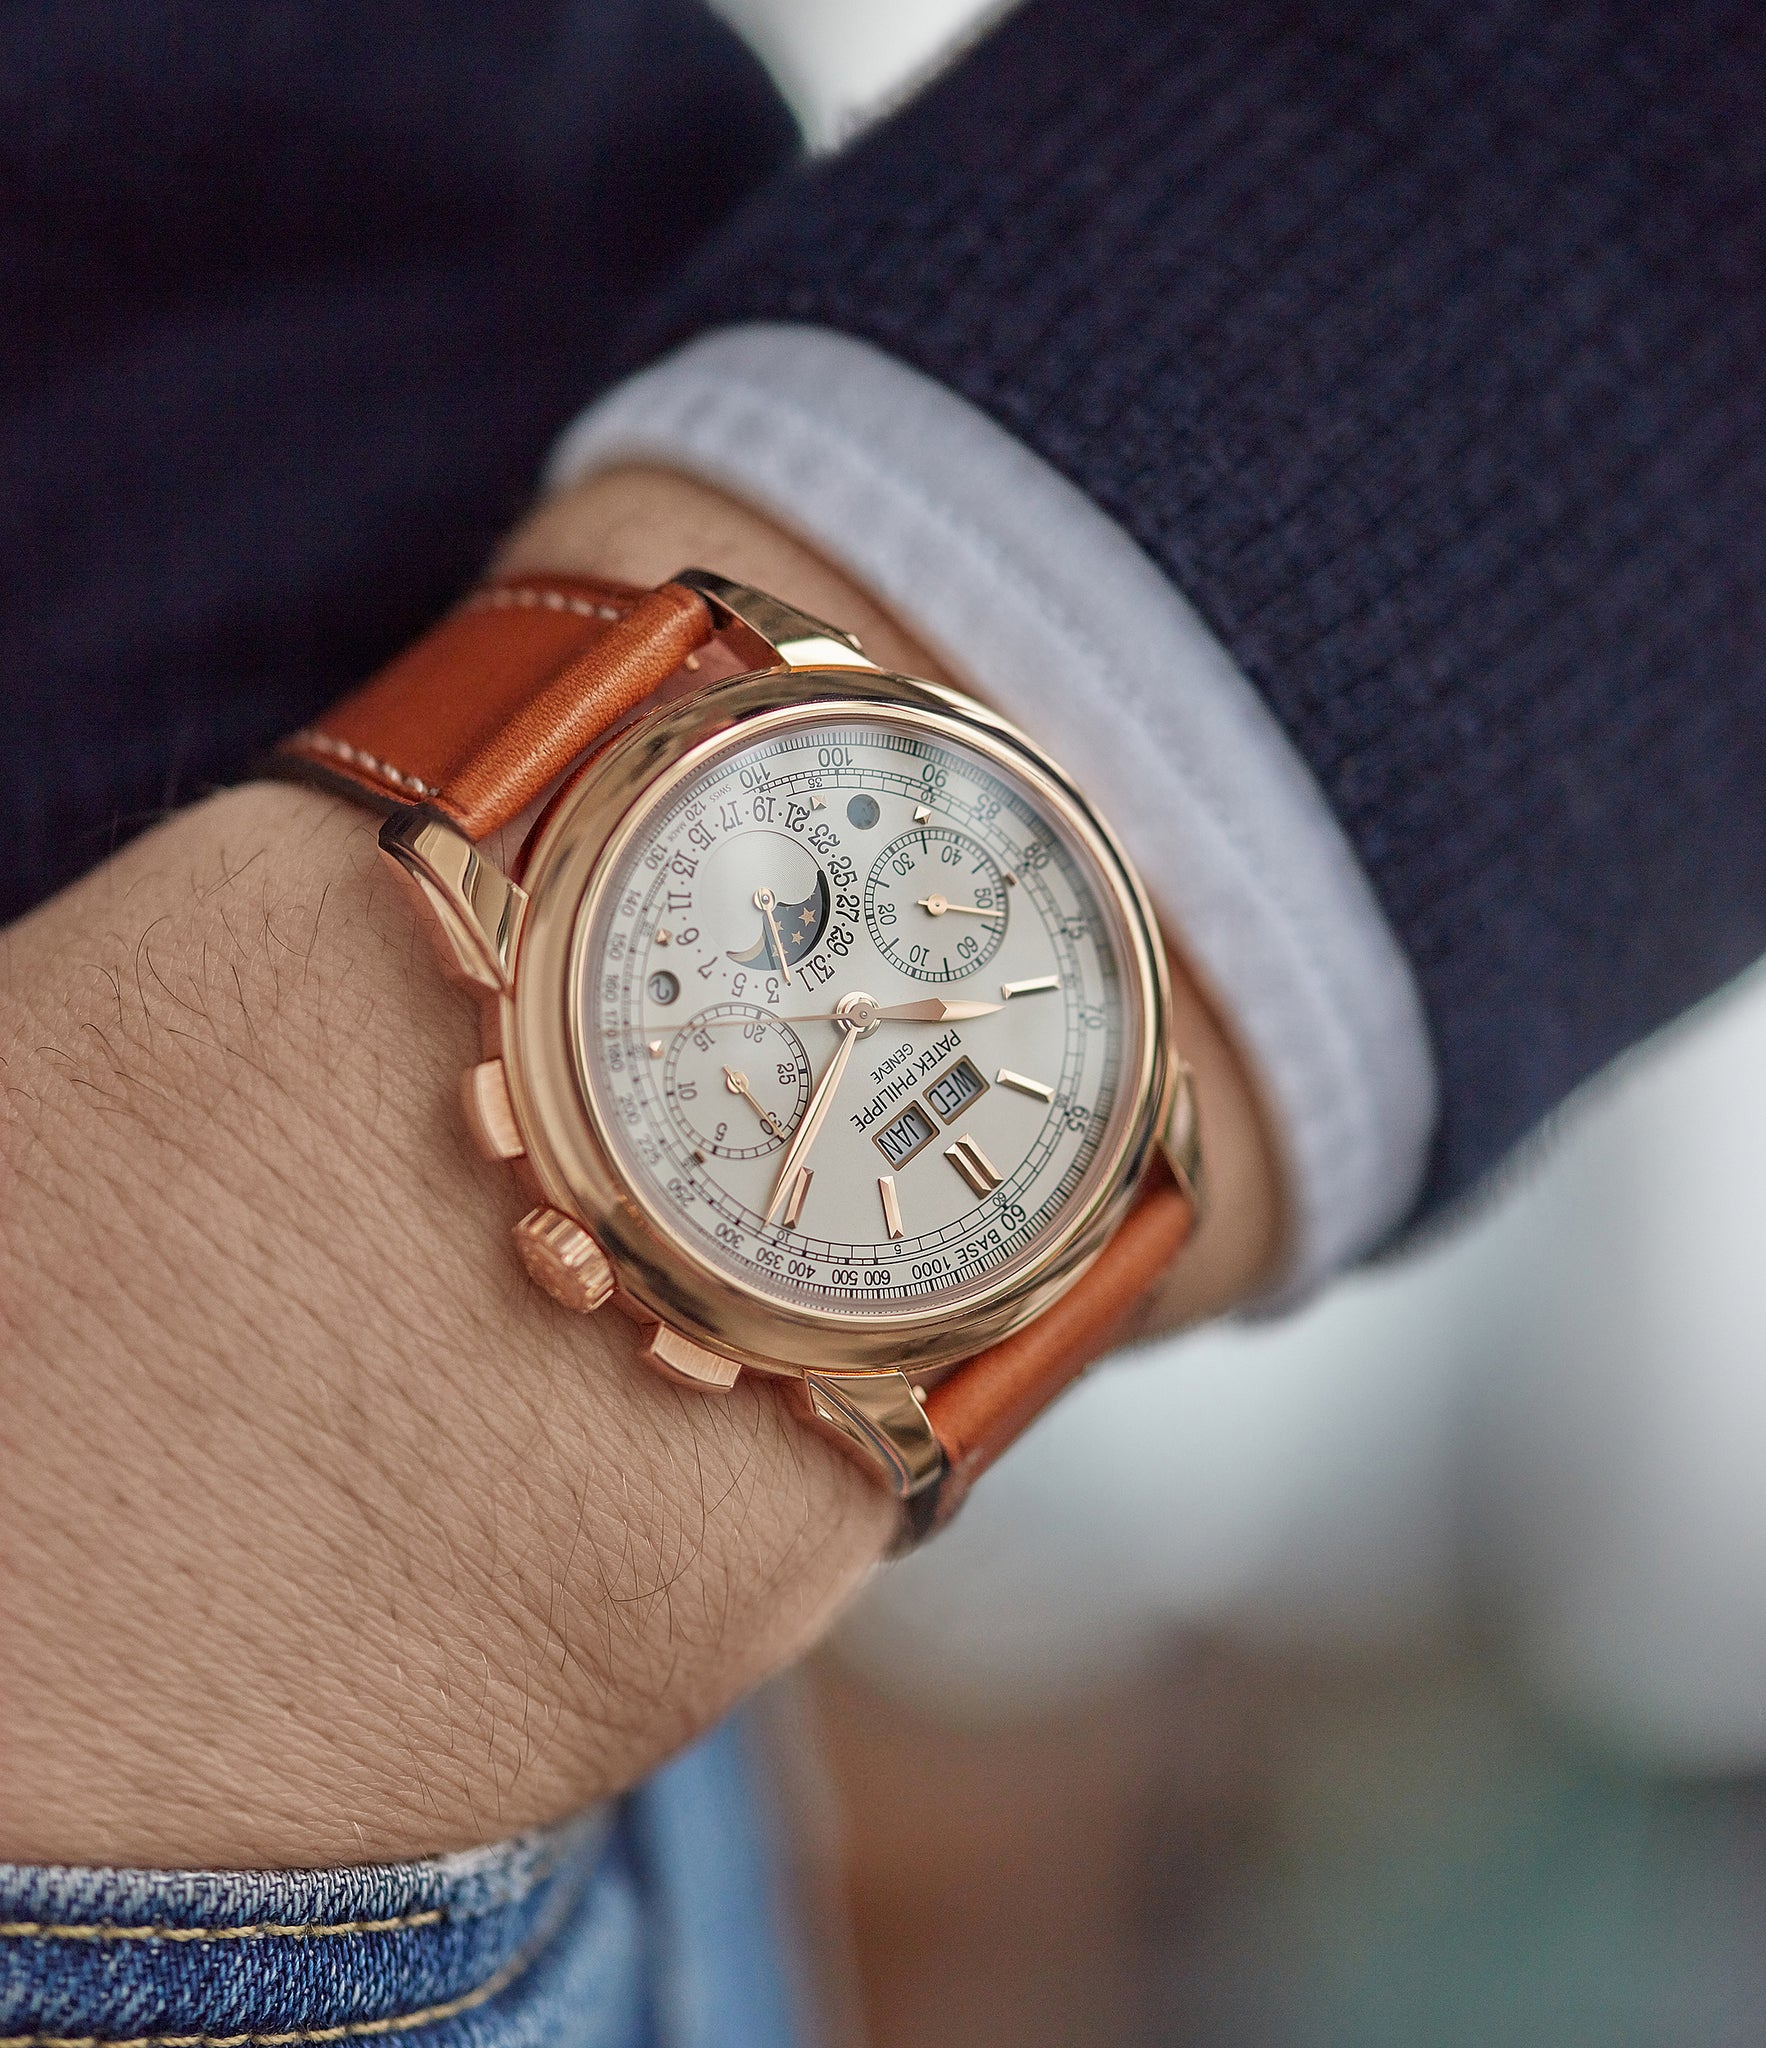 Patek Philippe Grand Complication Perpetual Calendar Chronograph 5270 rose gold dress watch for sale online at A Collected Man London UK specialist of rare watches